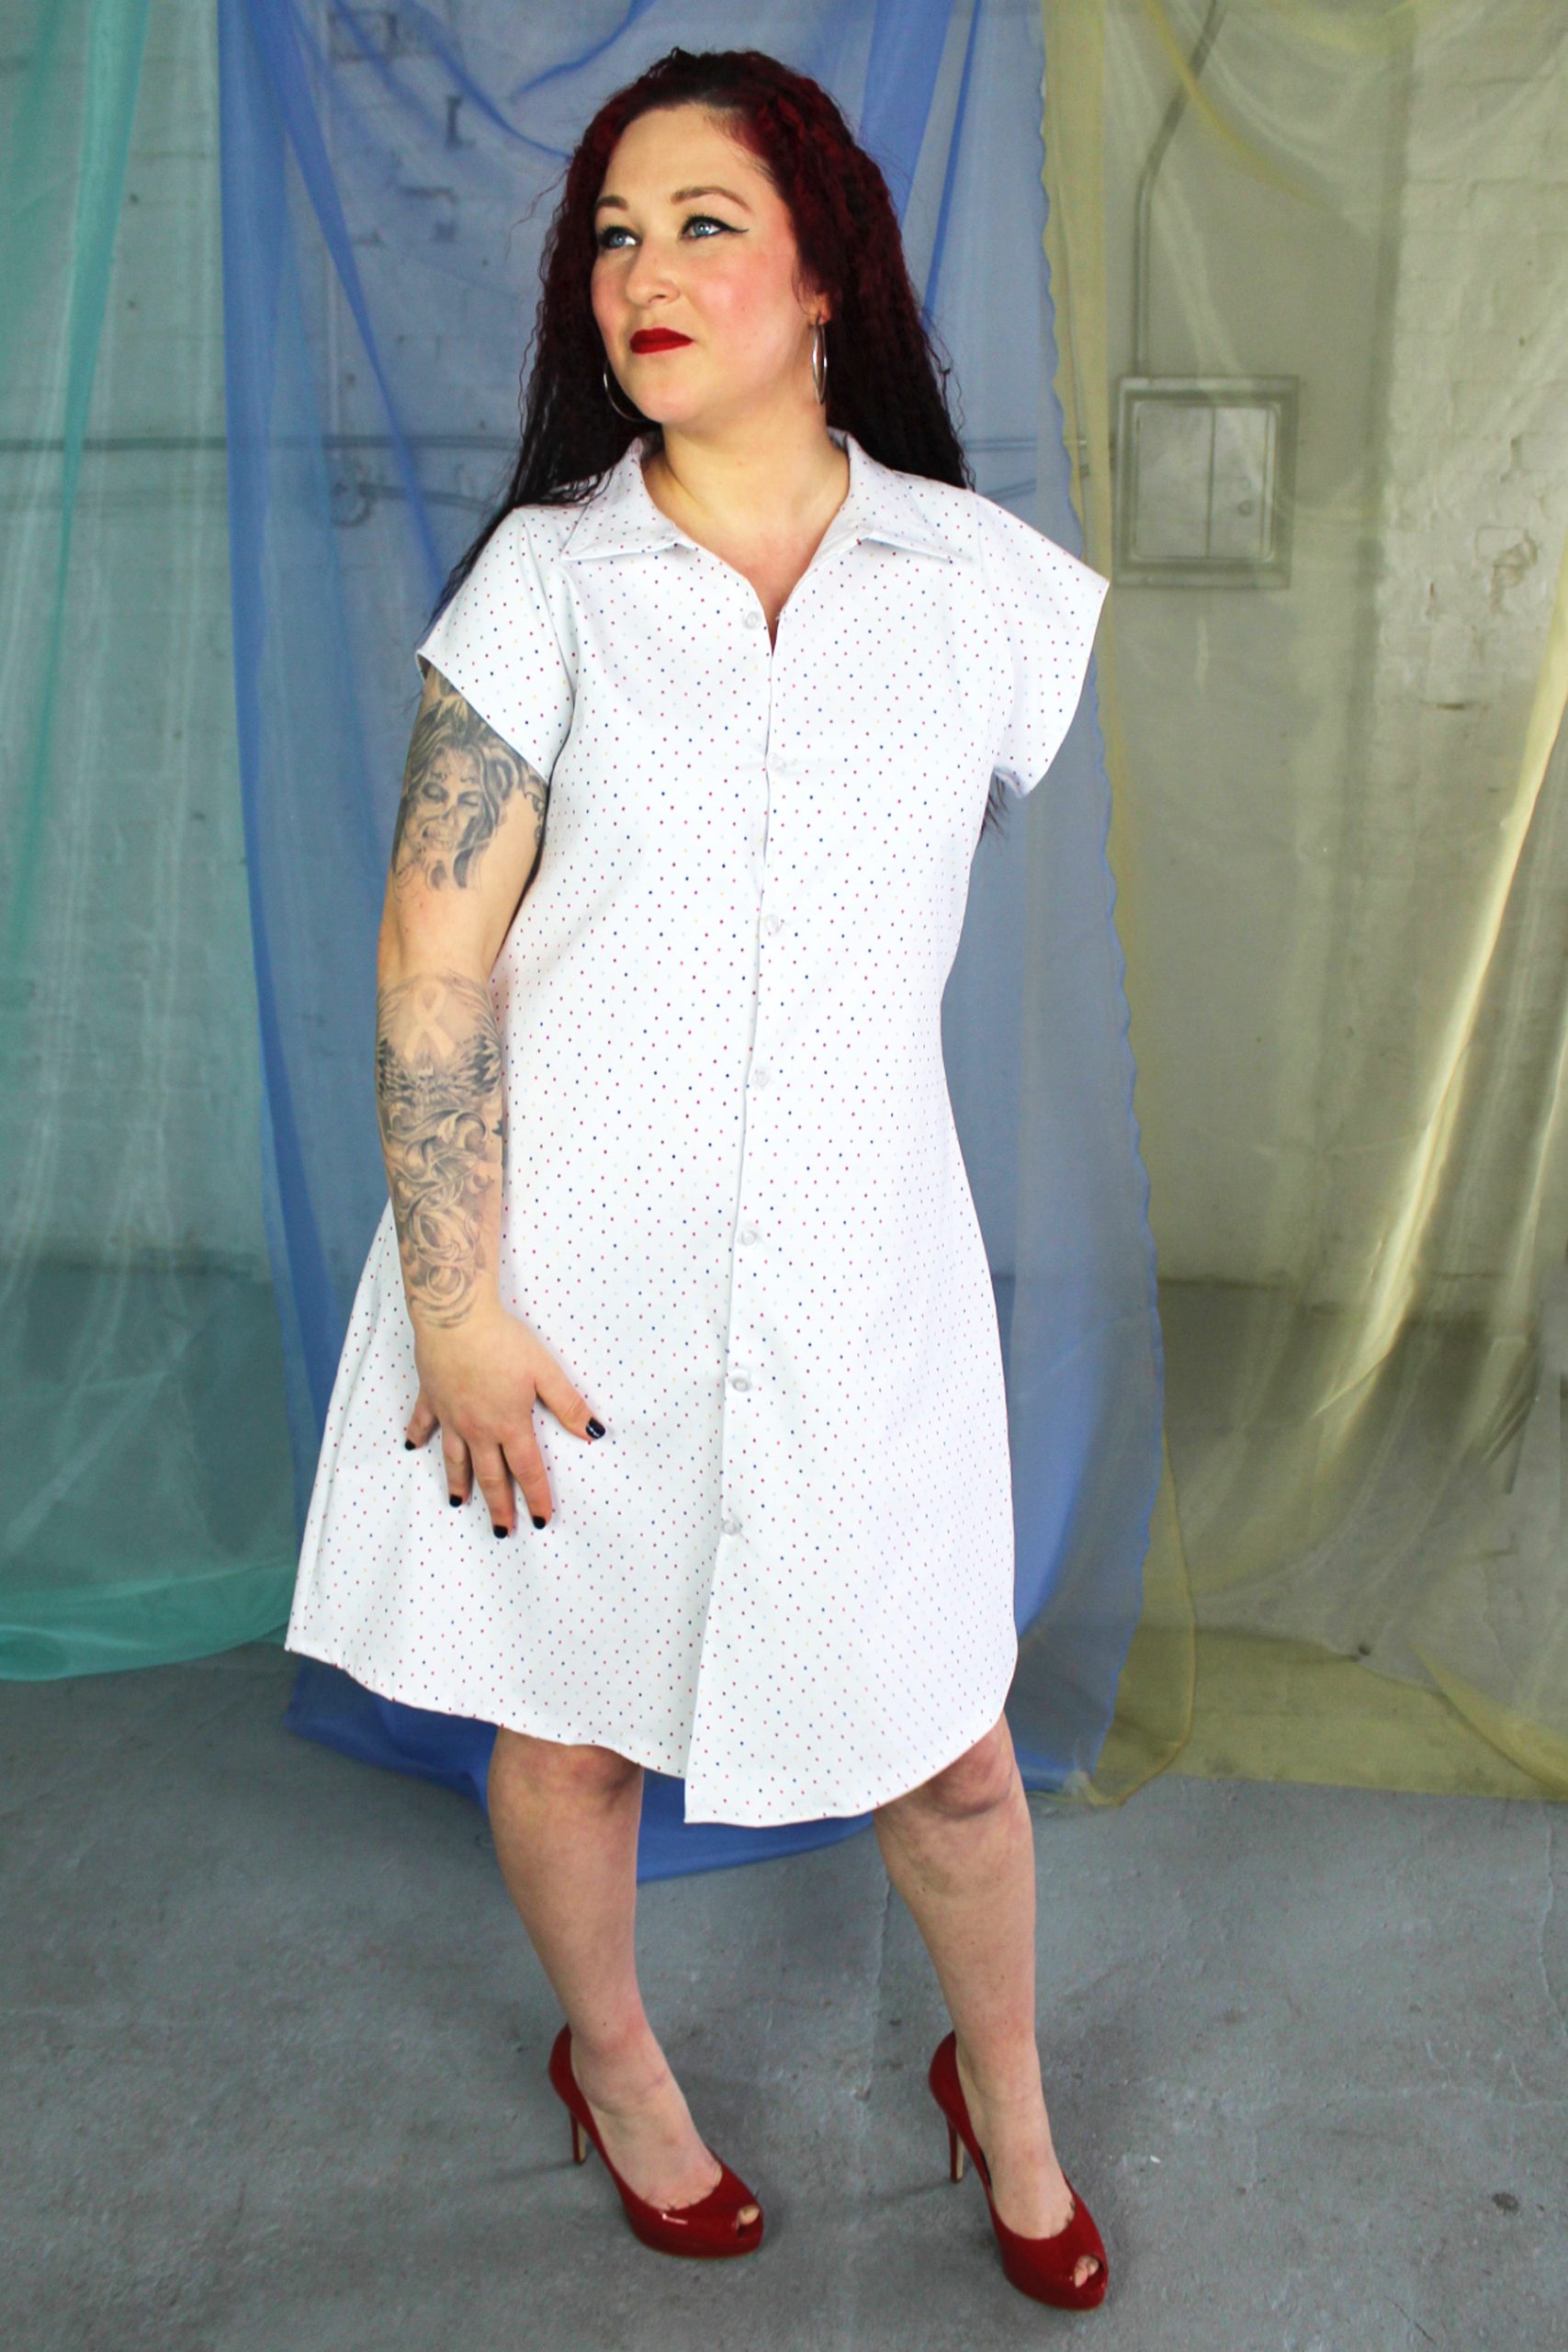 Straight size white female model with one arm modeling white + multi color polka dot button front collared shirt dress